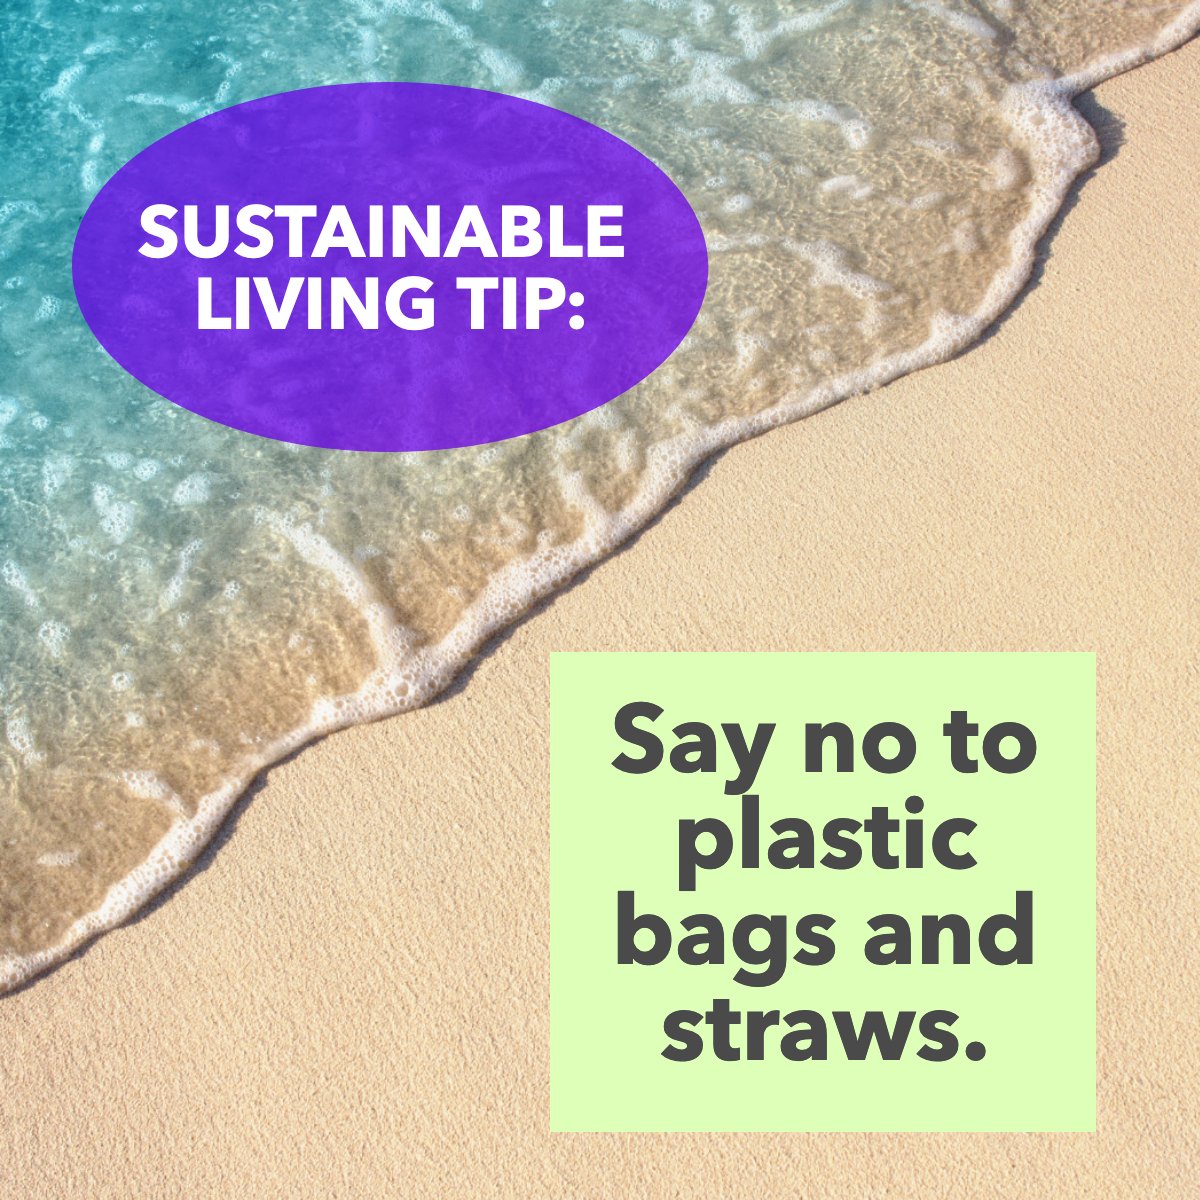 'Never doubt that a small group of thoughtful, committed citizens can change the world; indeed it’s the only thing that ever has.'
– Margaret Mead

#sustainablelifestyle    #sustainable    #sustainablity    #noplastic    #savethebeaches